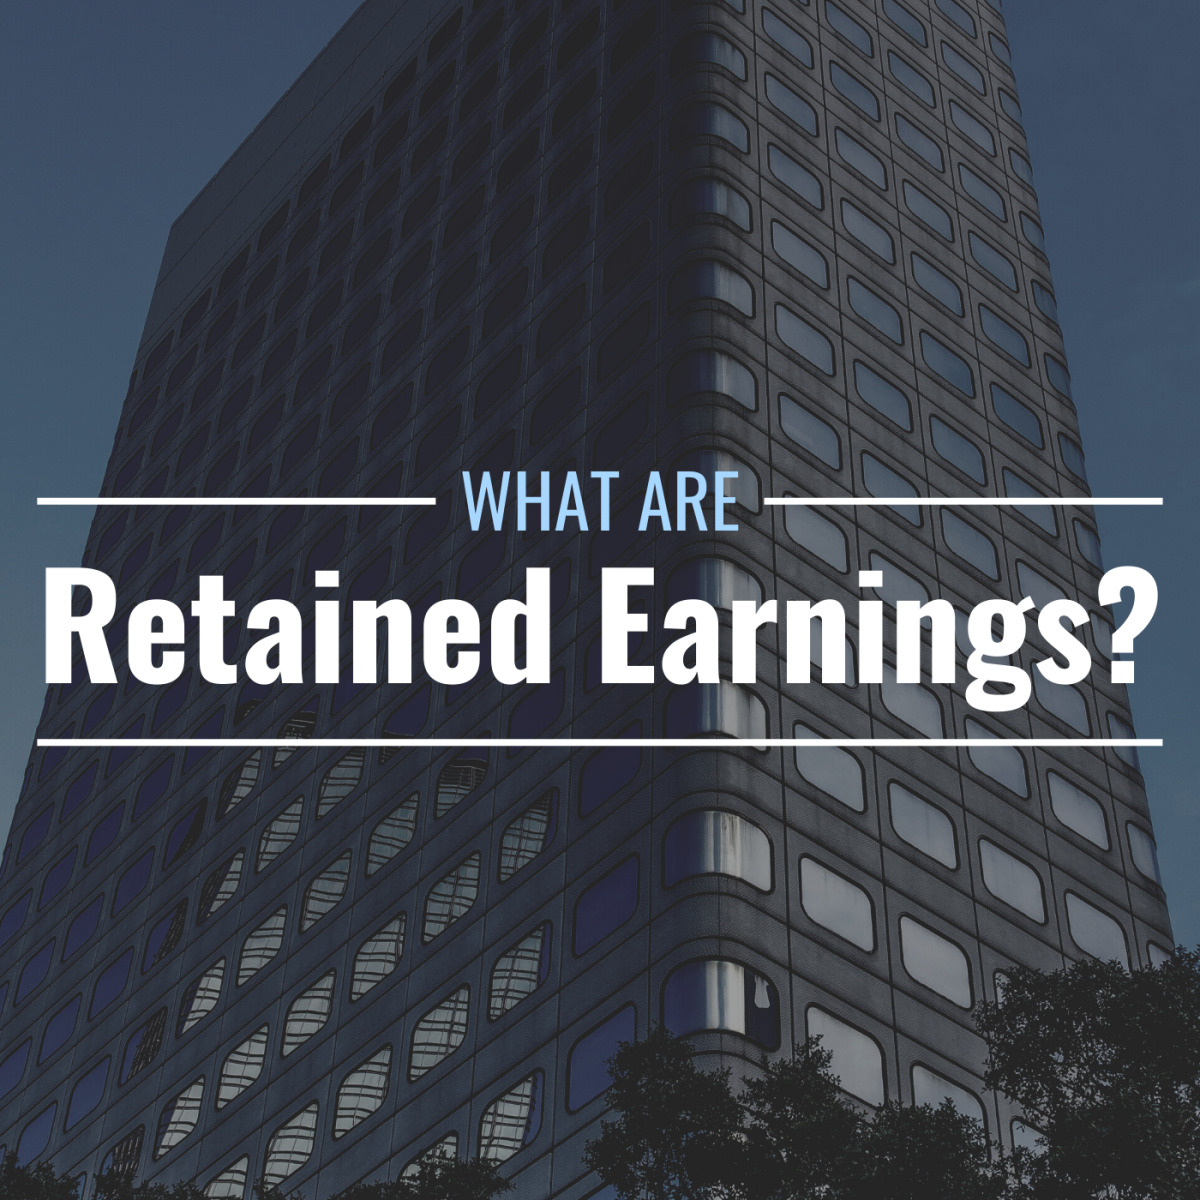 Darkened photo of a tall office building with text overlay that reads "What Are Retained Earnings?"